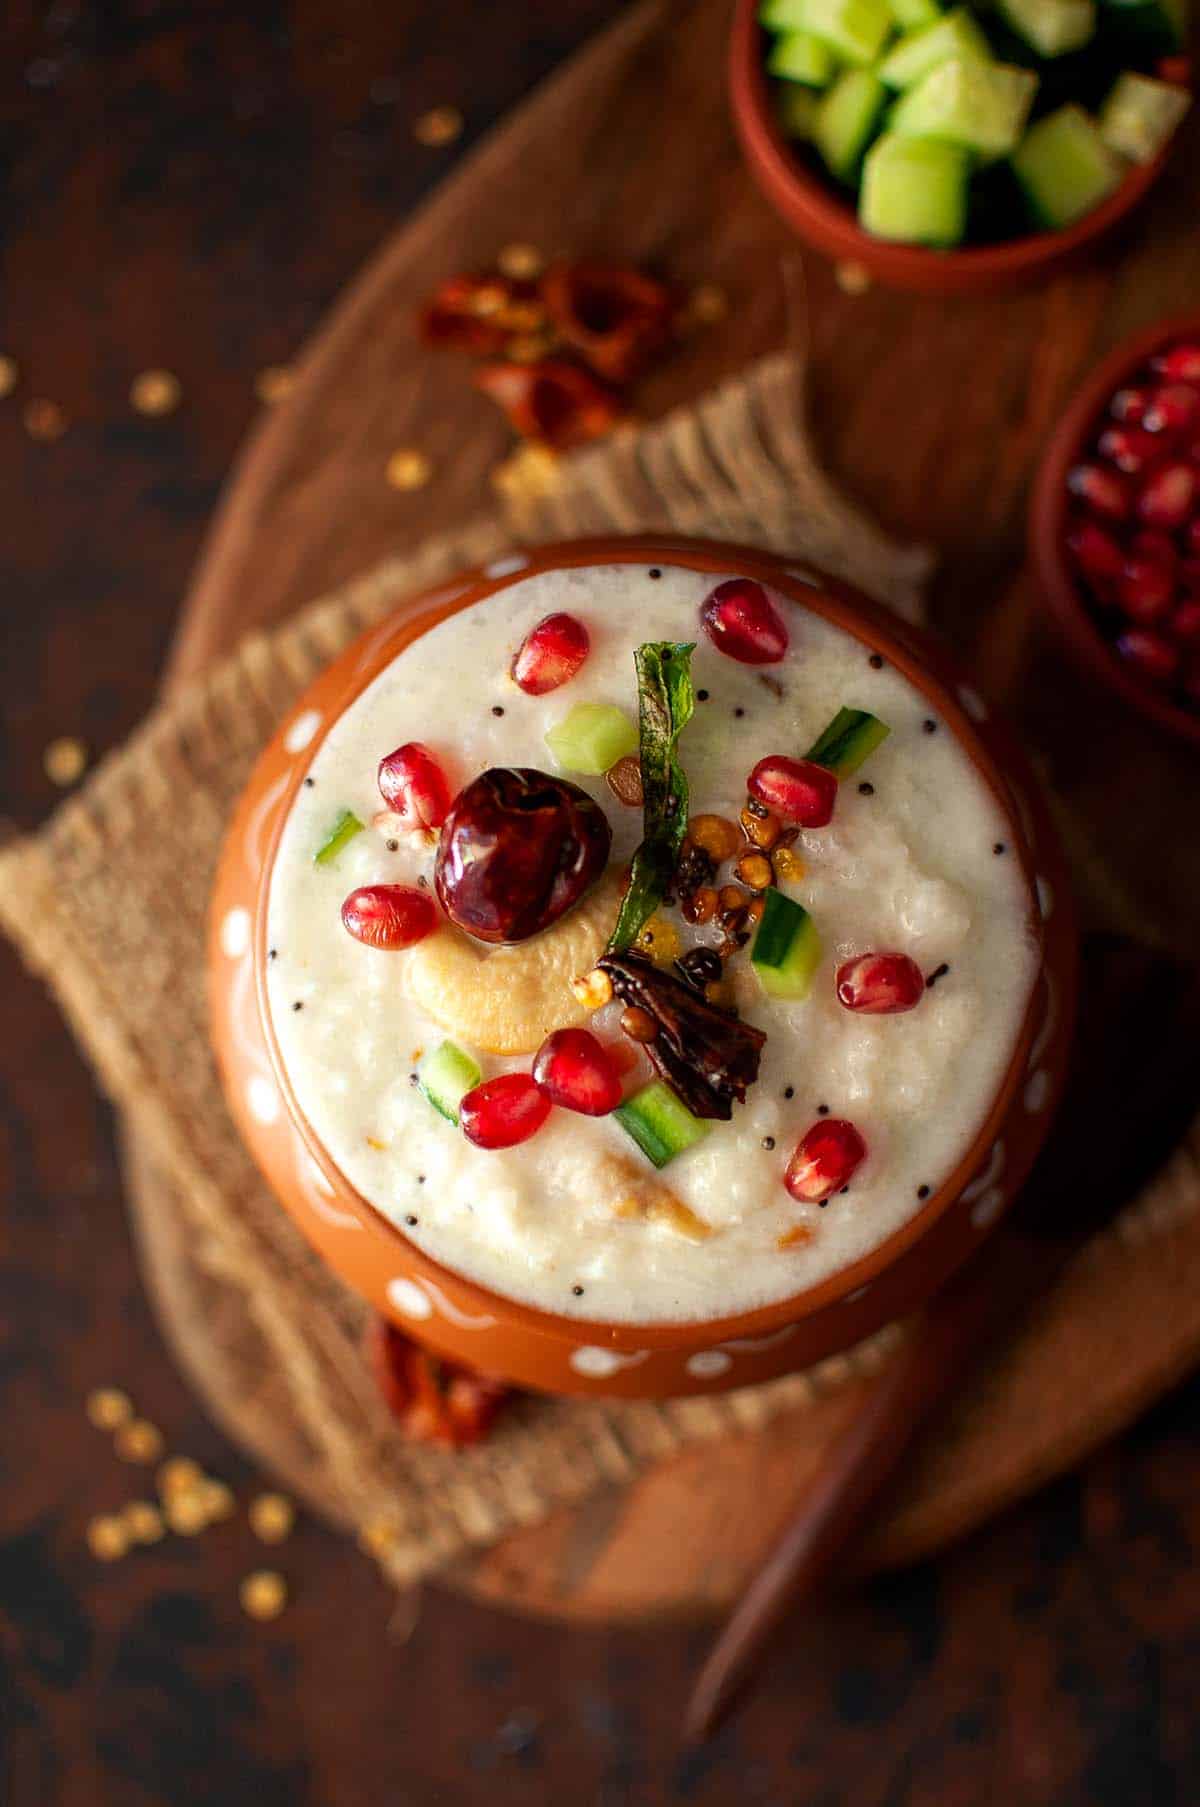 Terracotta bowl with yogurt rice topped with pomegranate arils.